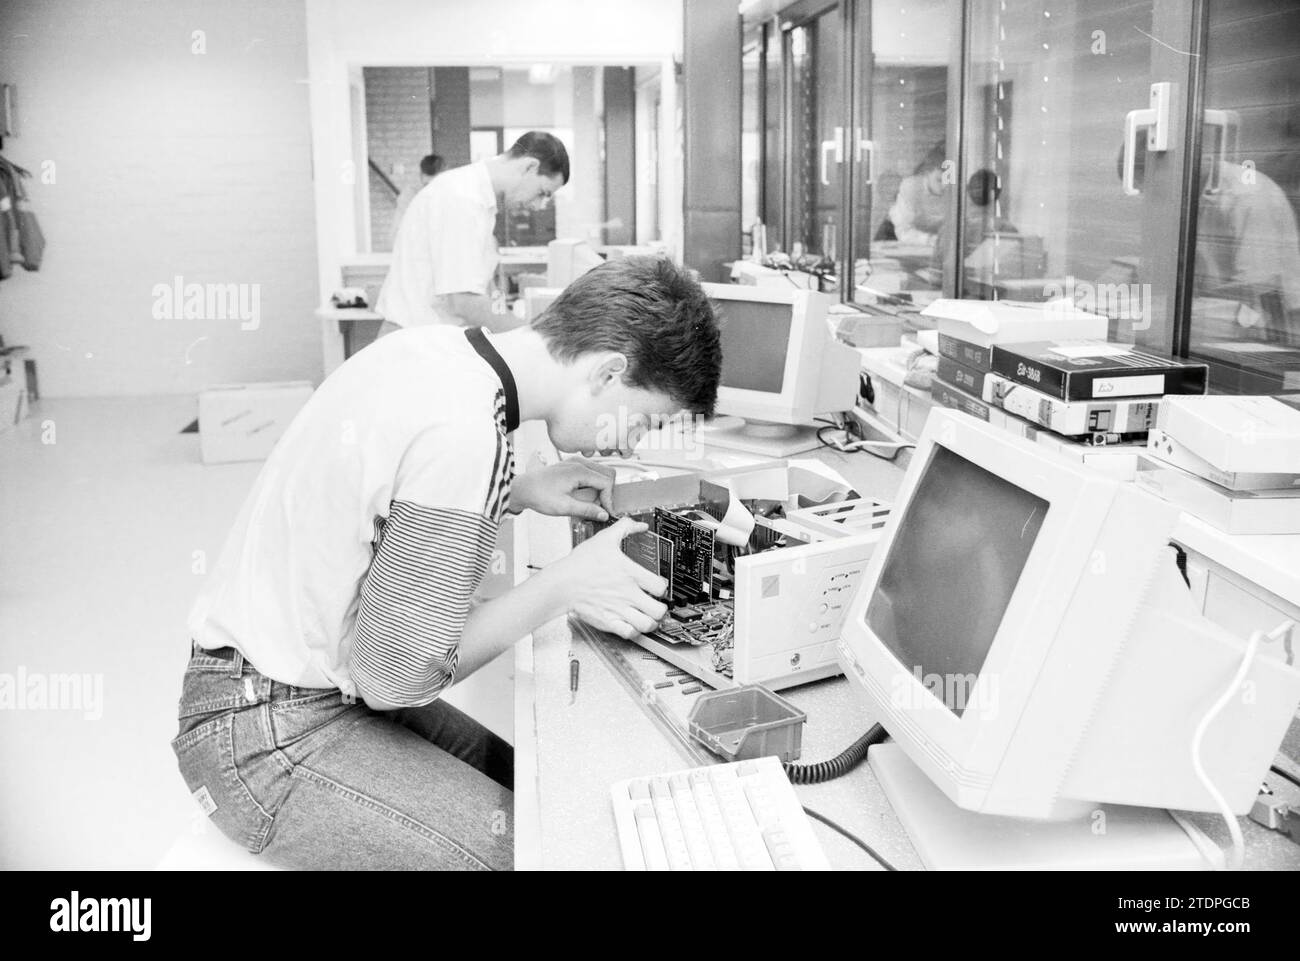 Occupations: Computer Technical Service, 27-08-1991, Whizgle News from the Past, Tailored for the Future. Explore historical narratives, Dutch The Netherlands agency image with a modern perspective, bridging the gap between yesterday's events and tomorrow's insights. A timeless journey shaping the stories that shape our future Stock Photo